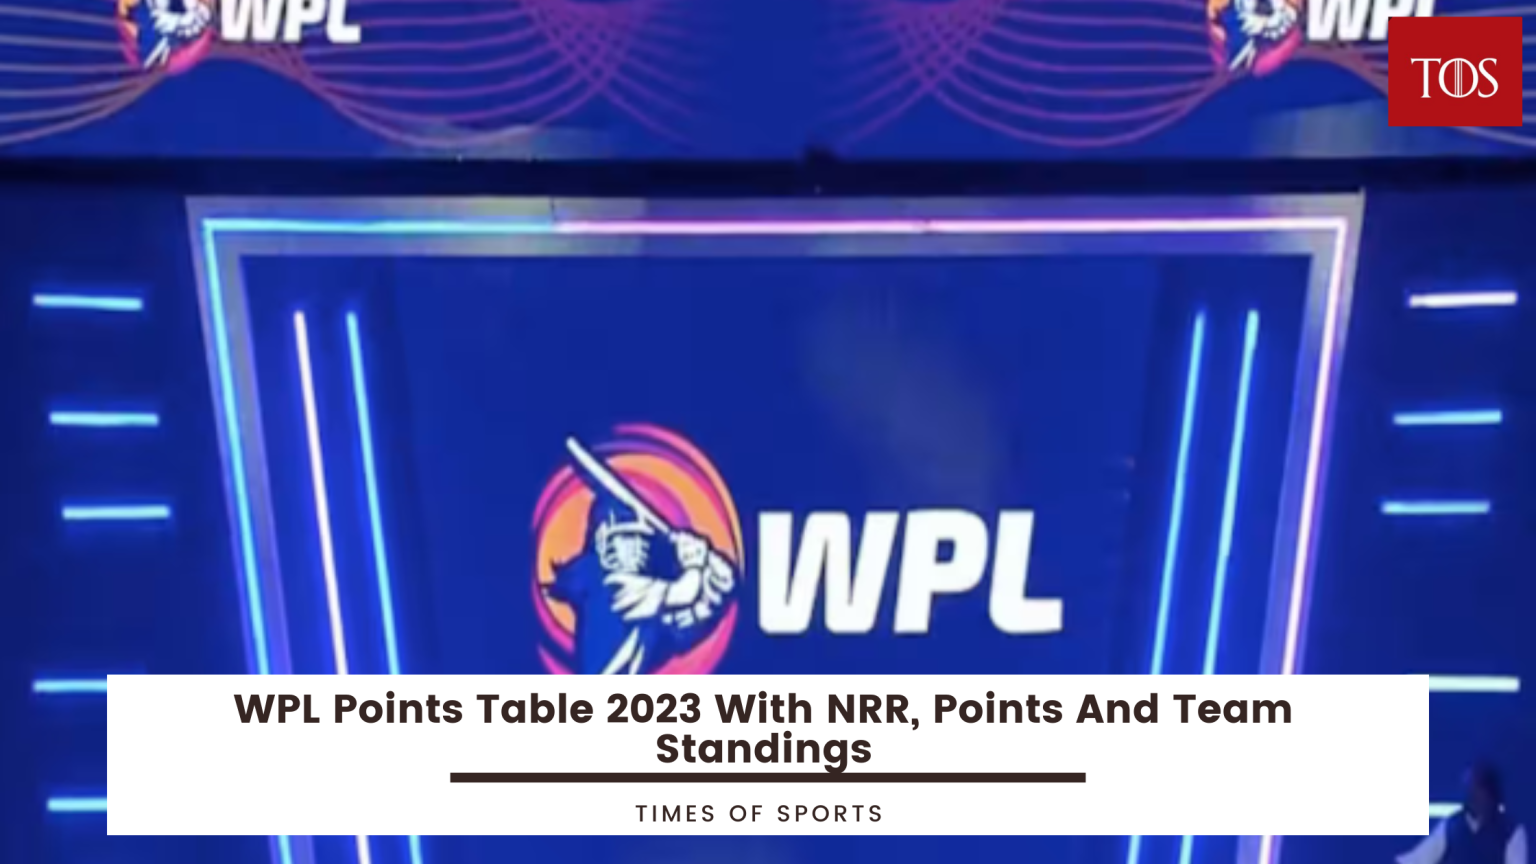 WPL Points Table 2023 With NRR, Points And Team Standings